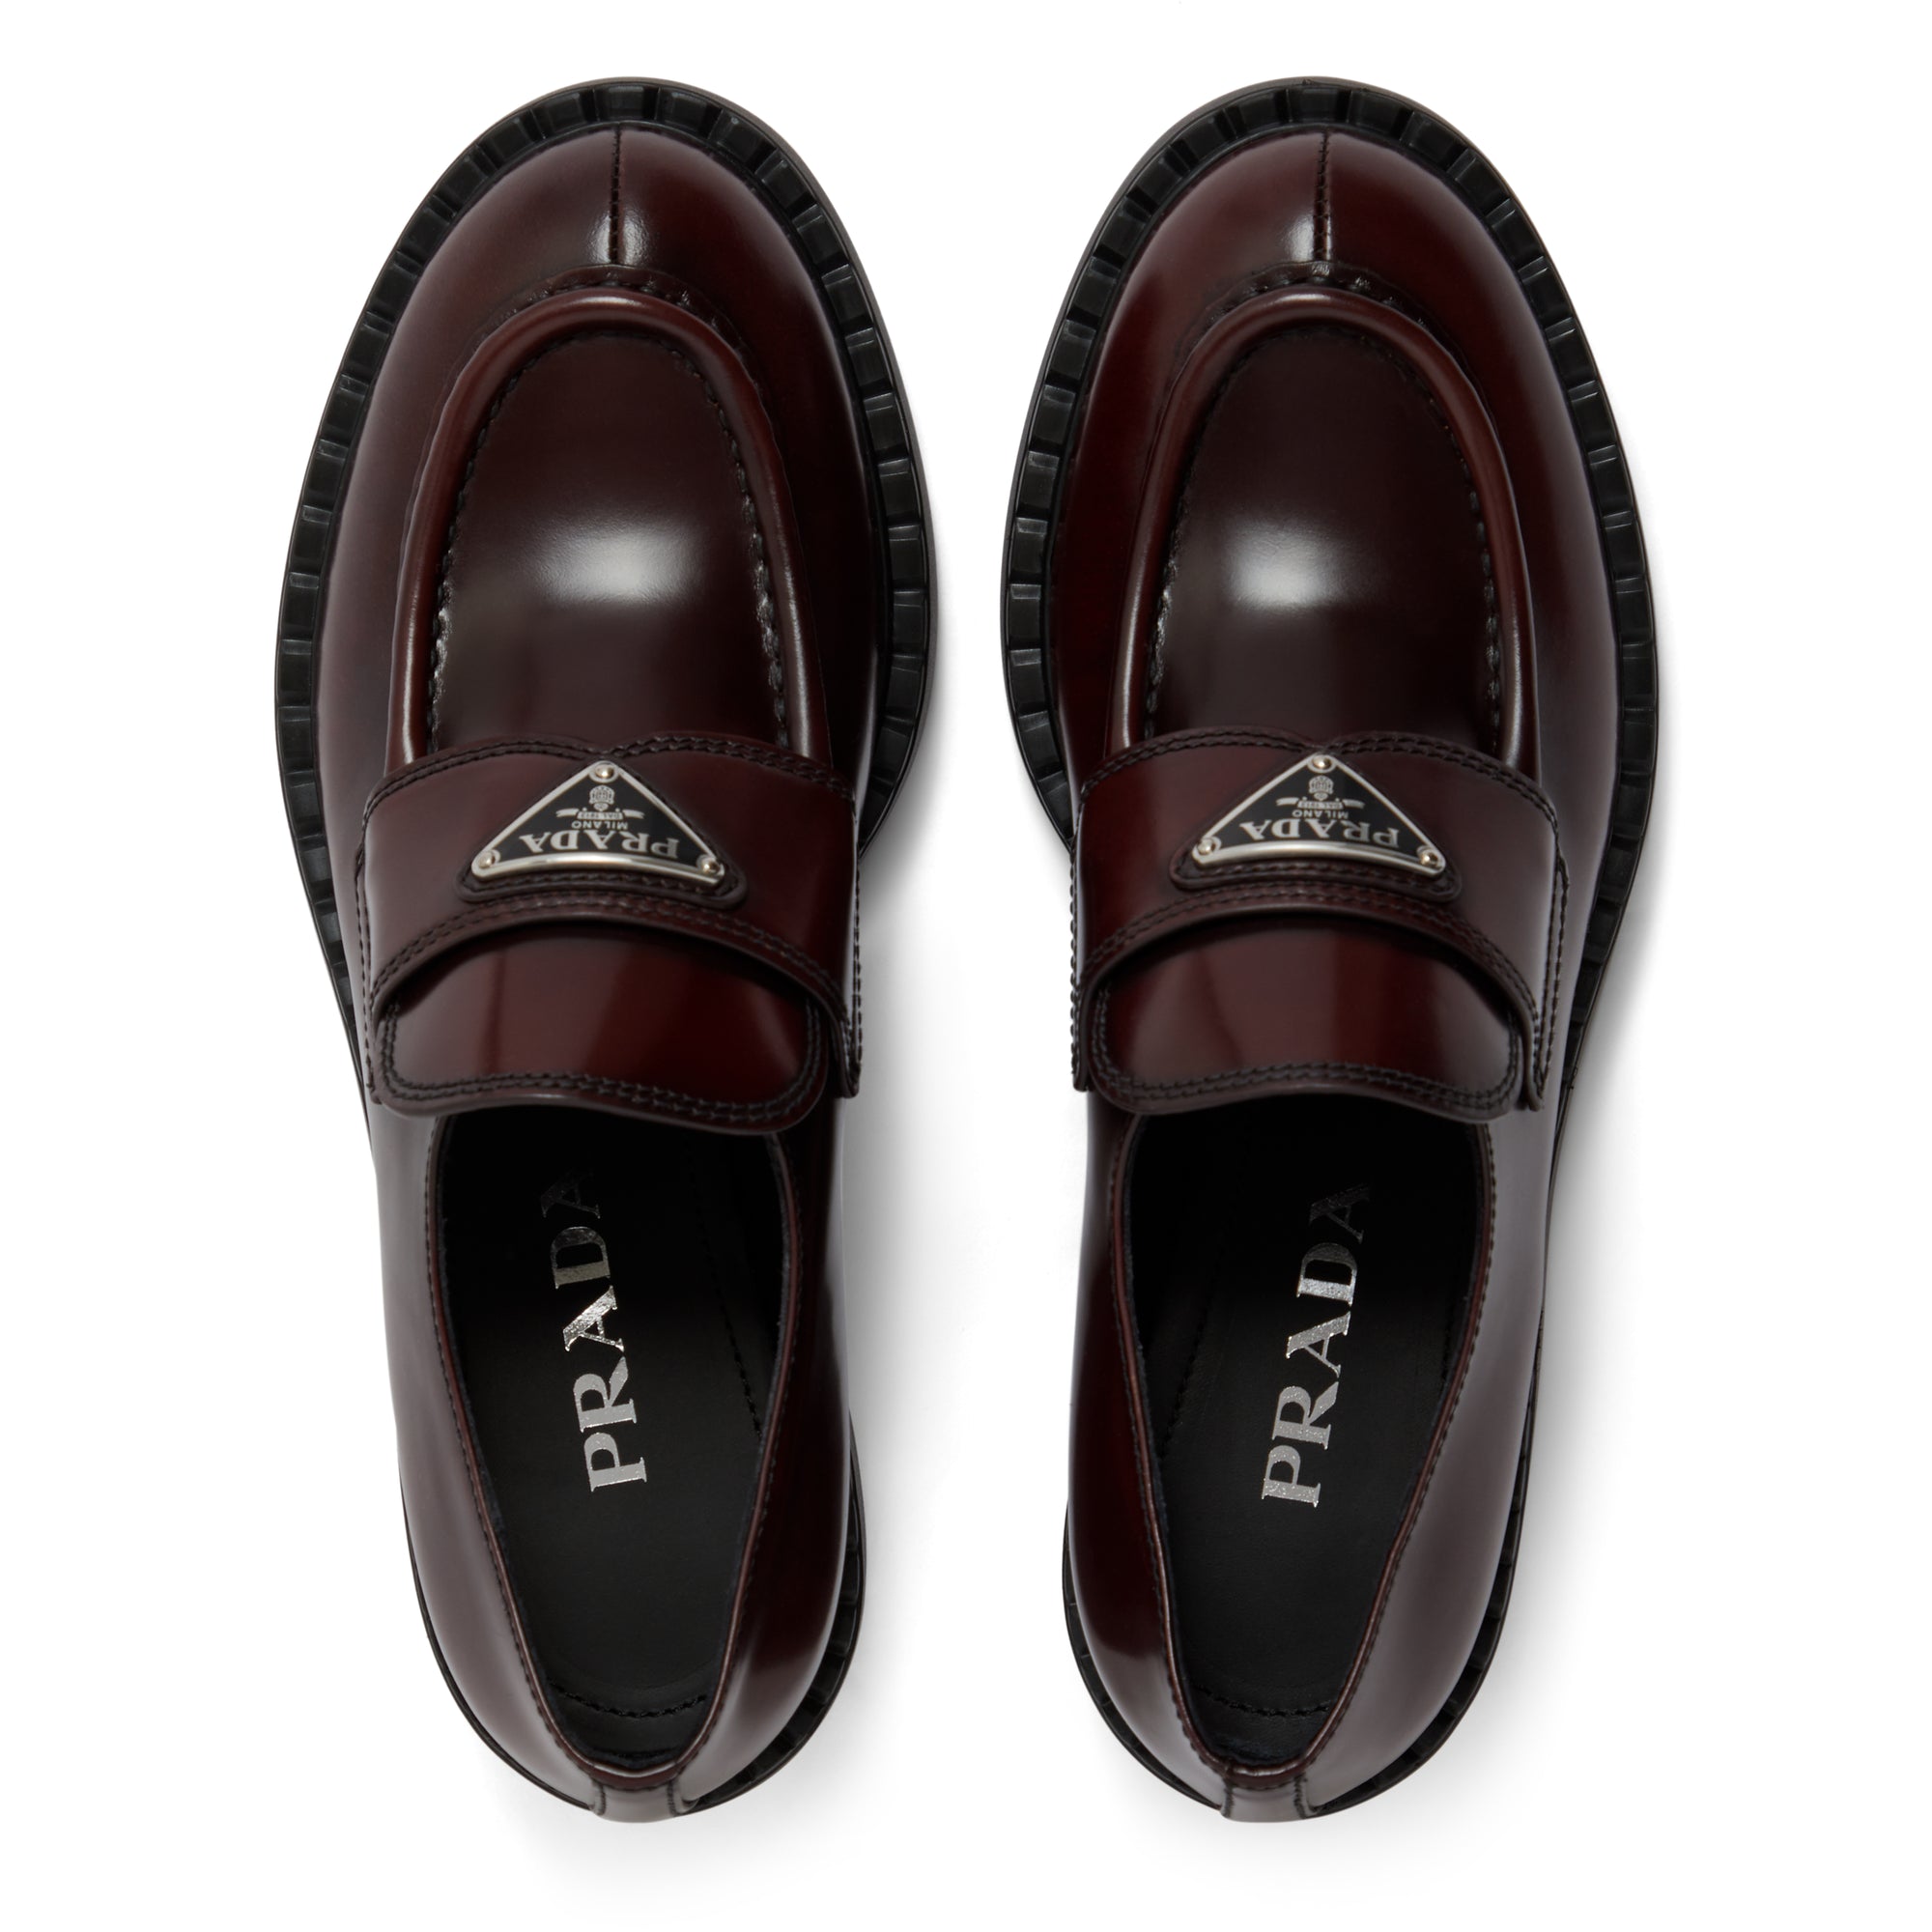 Prada - Women’s Brushed Leather Loafer - (Cordovan) view 4